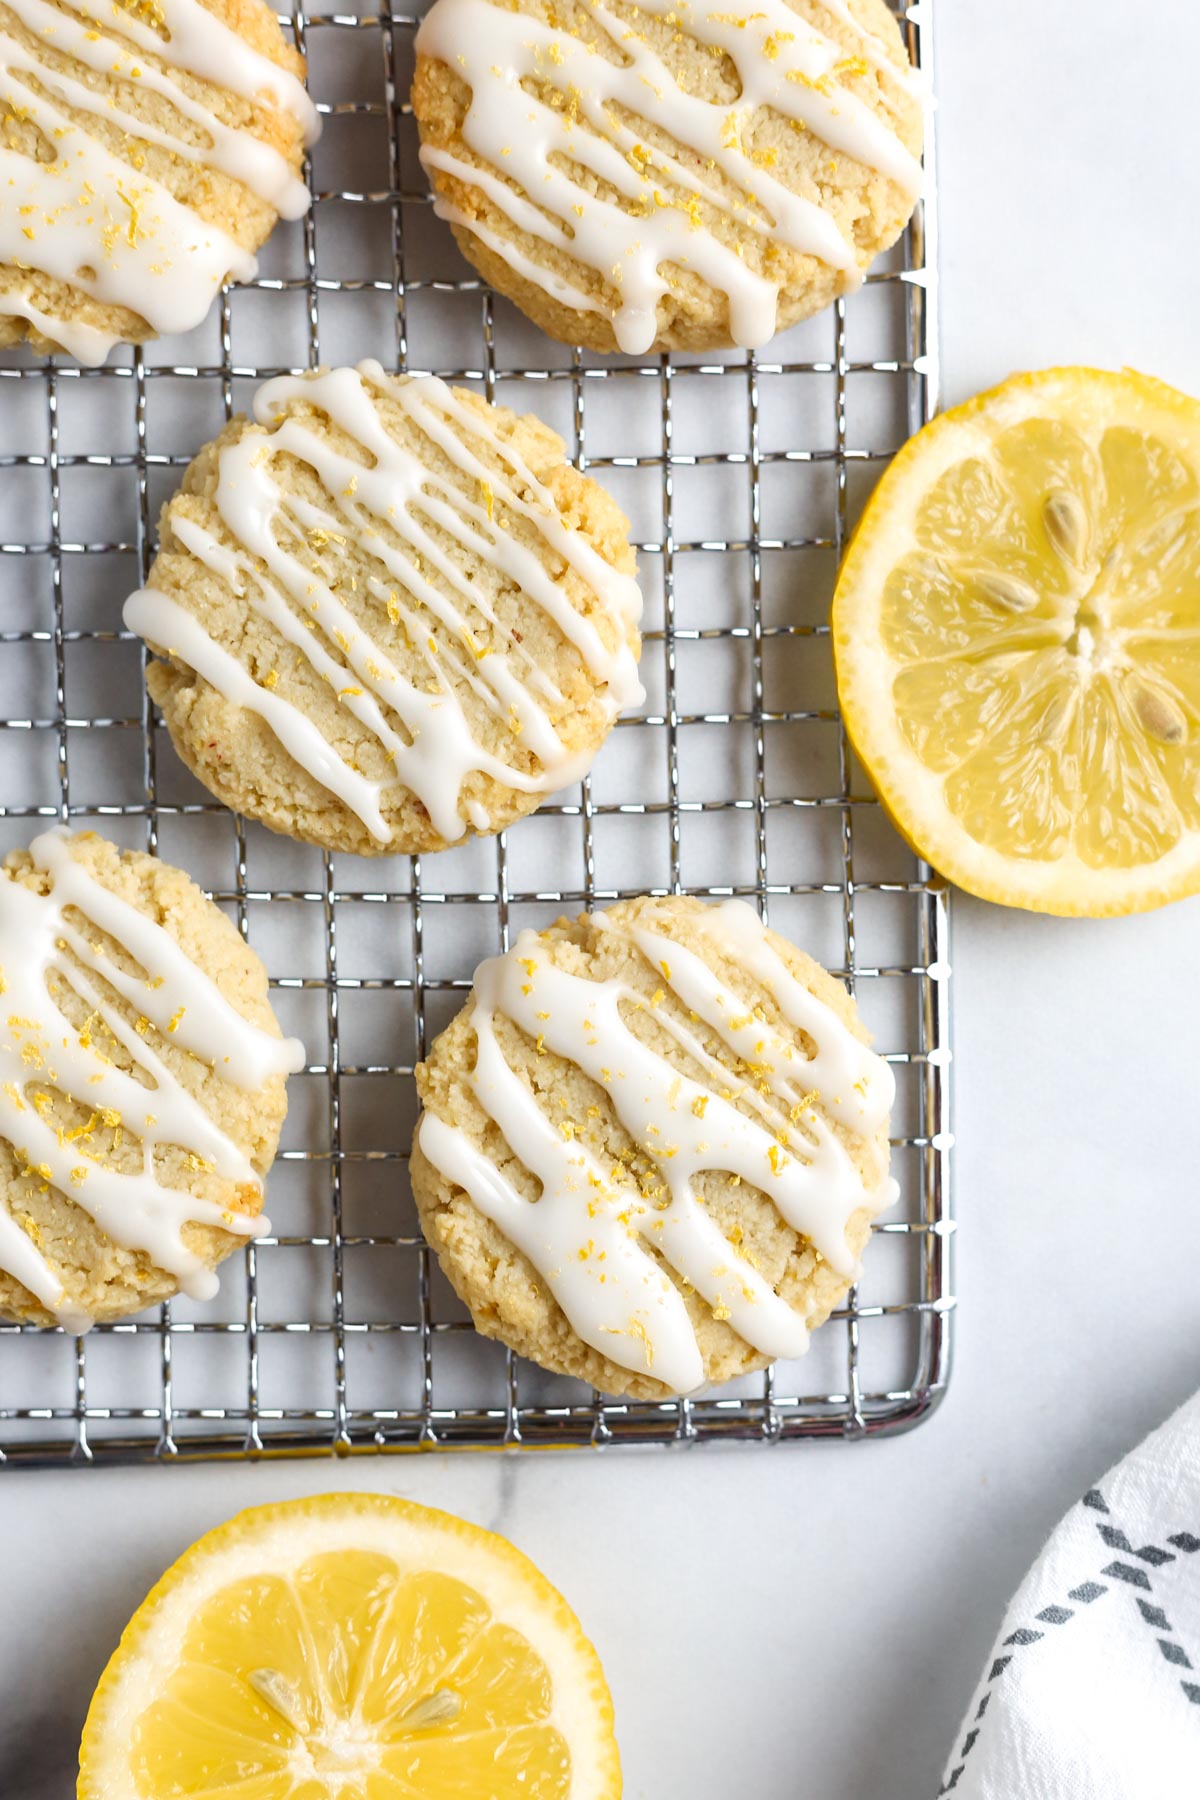 vegan lemon cookies with a drizzle of lemon glaze and lemon zest on top. The cookies are on a gray tray.